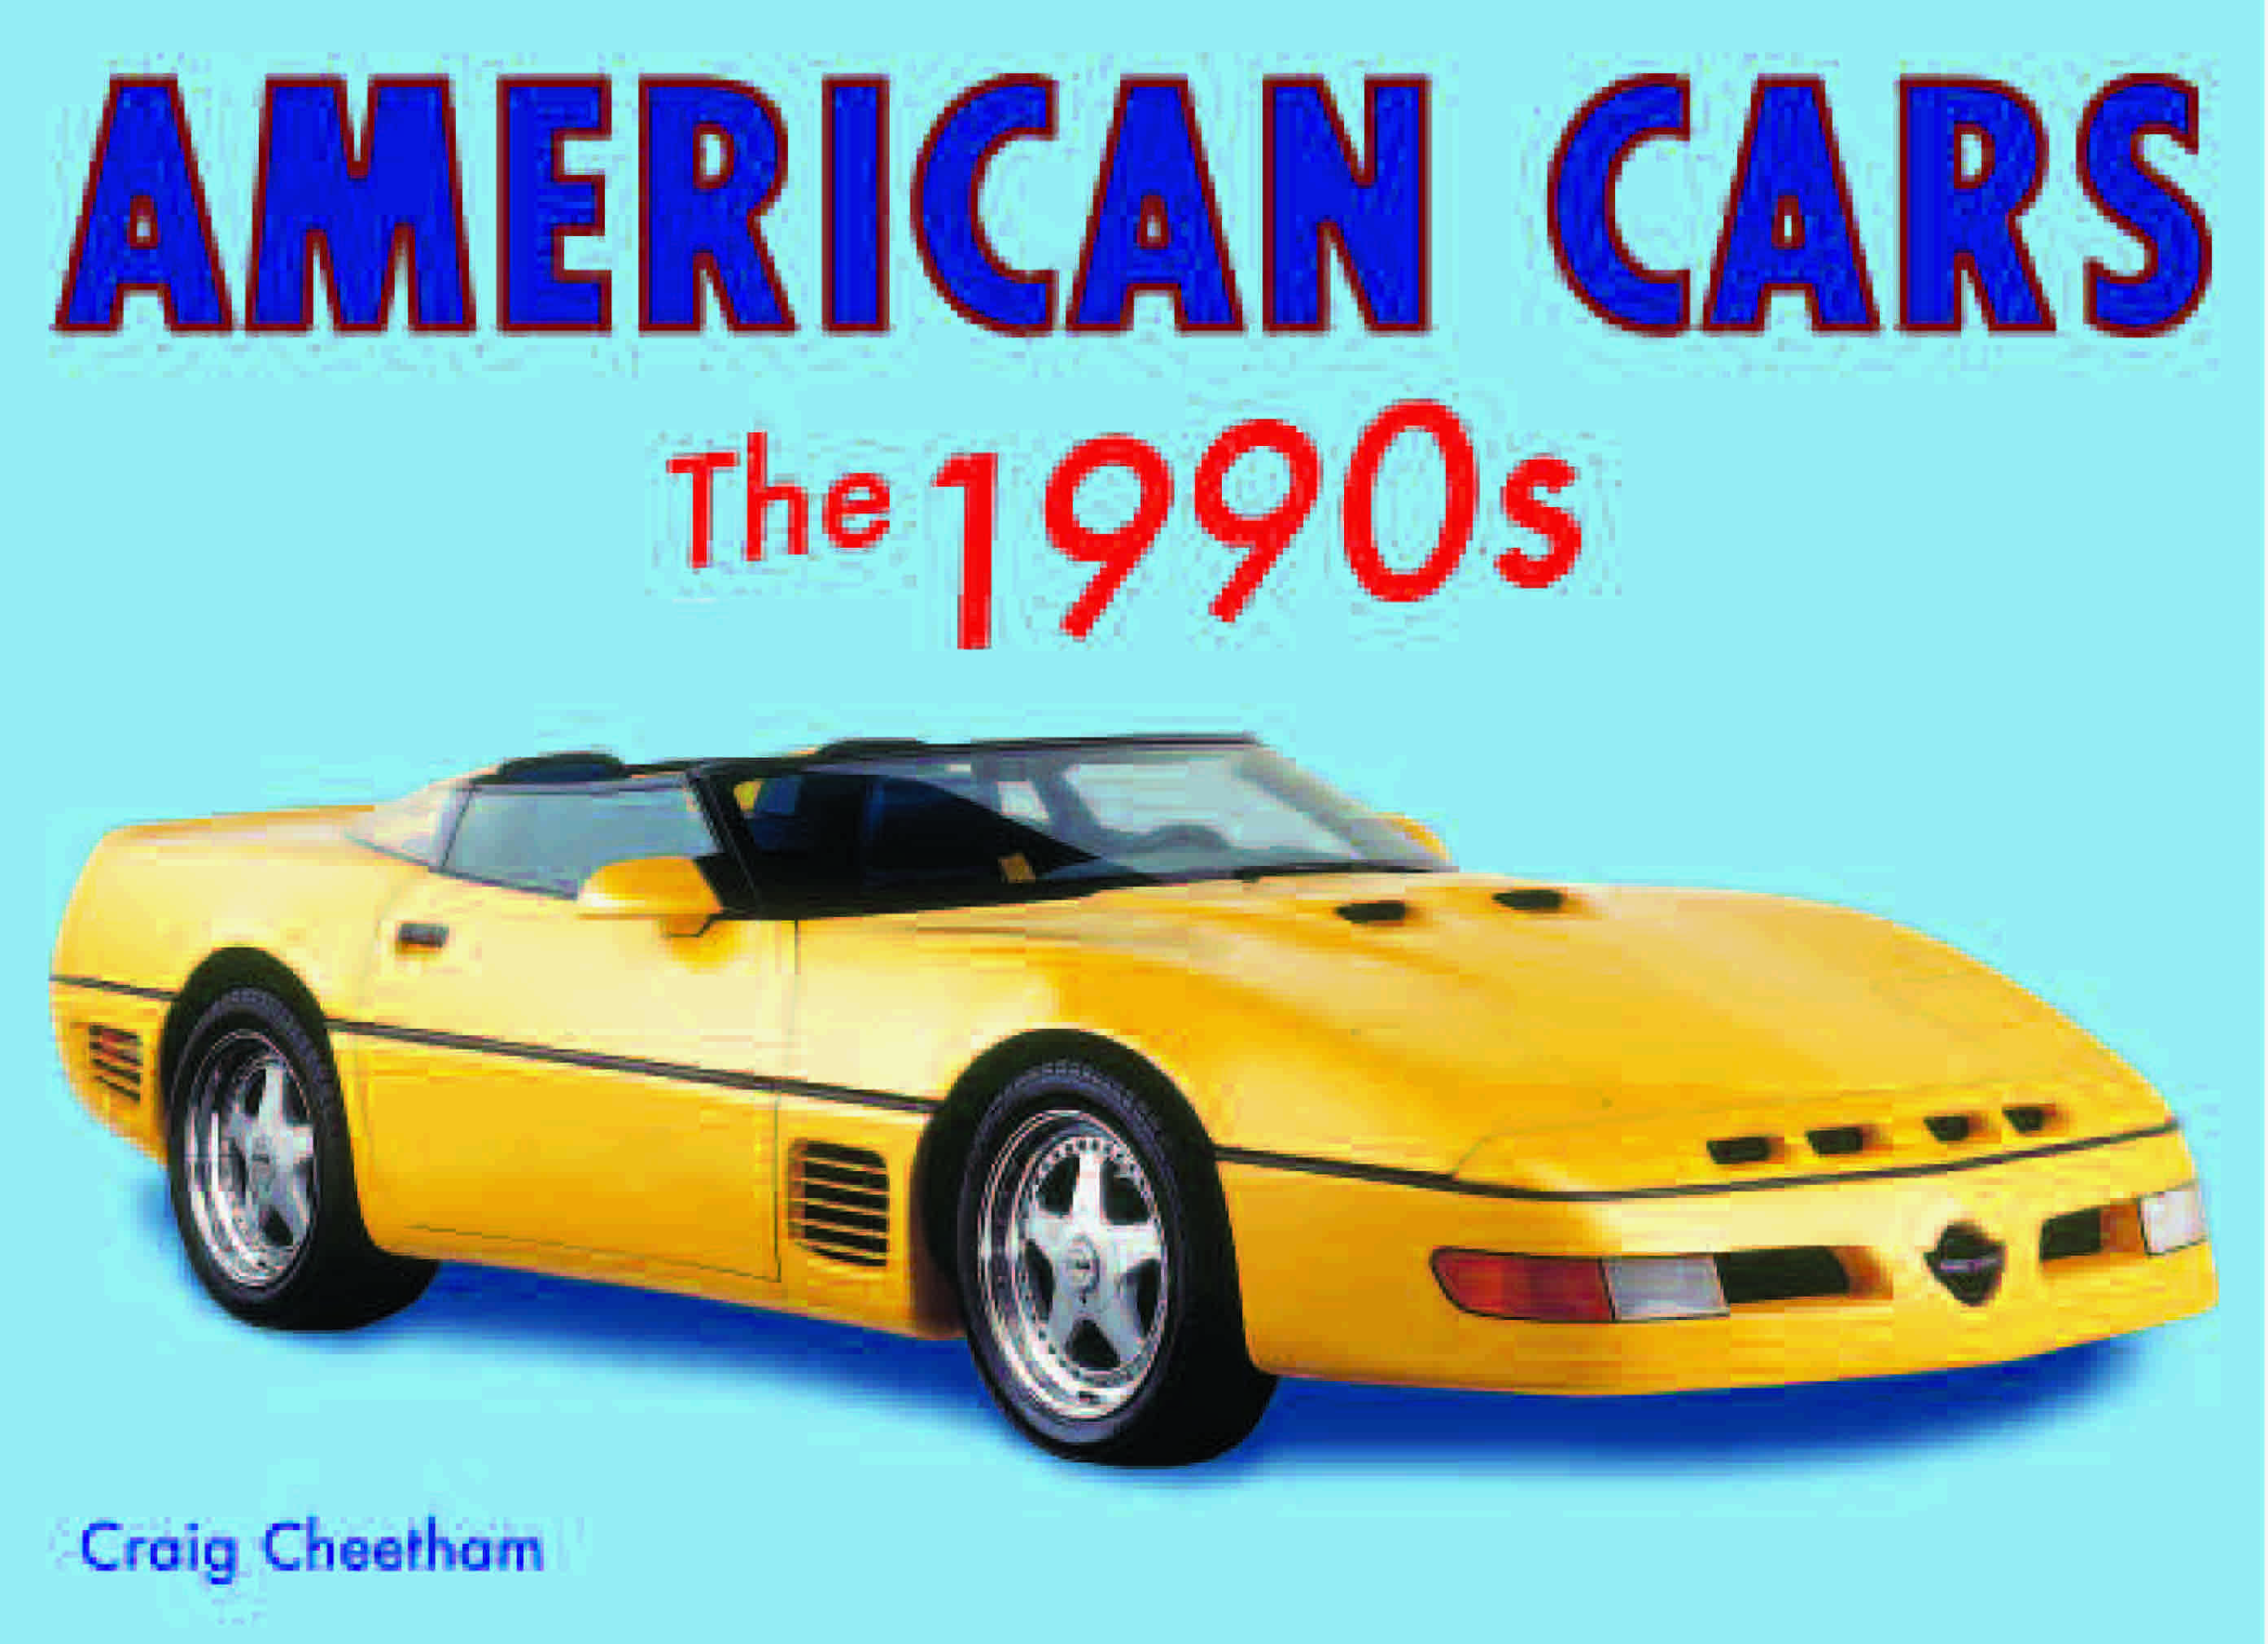 American Cars: The 1990s